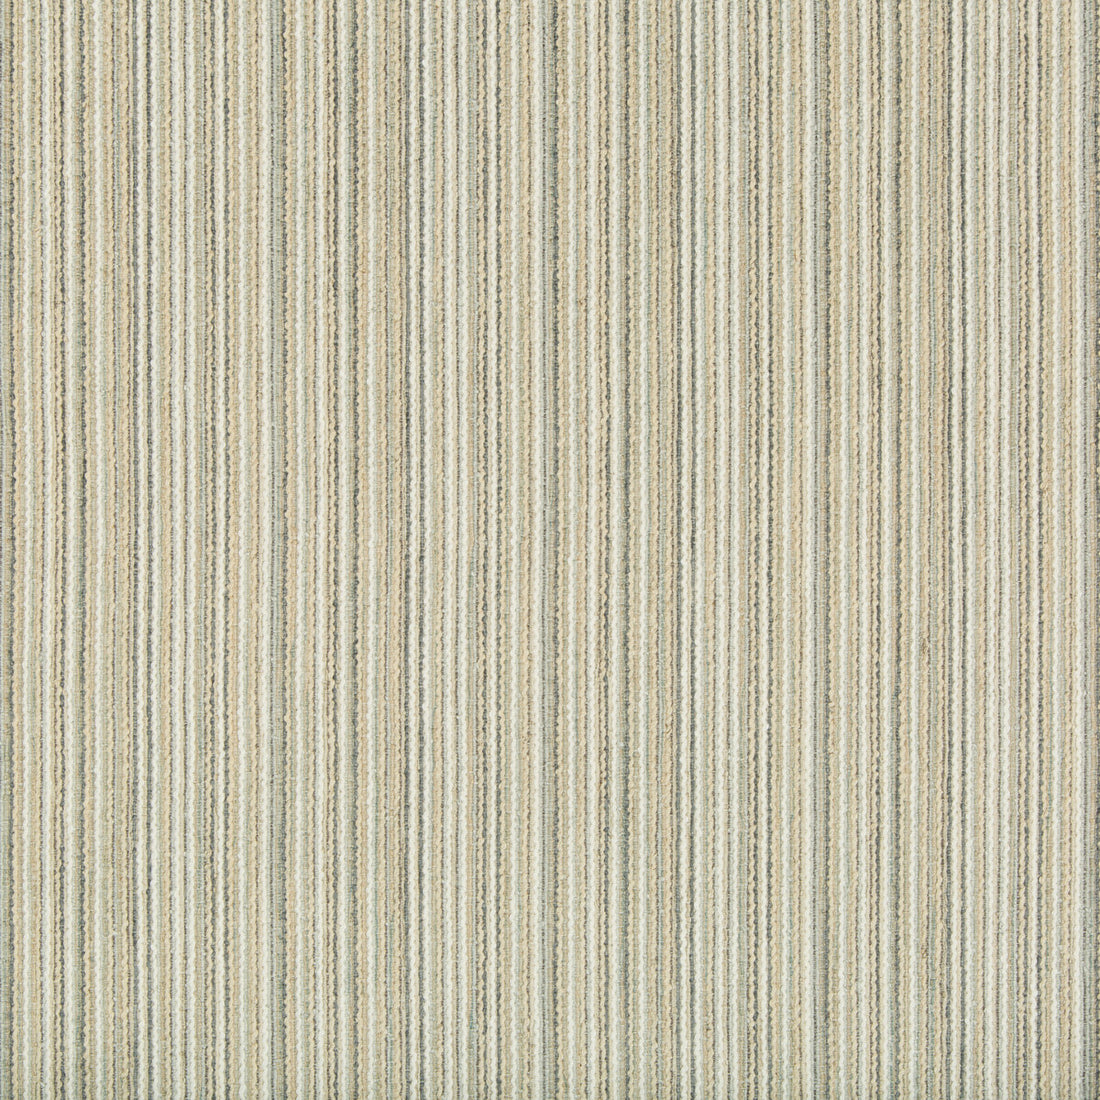 Kravet Design fabric in 34989-1615 color - pattern 34989.1615.0 - by Kravet Design in the Performance Crypton Home collection